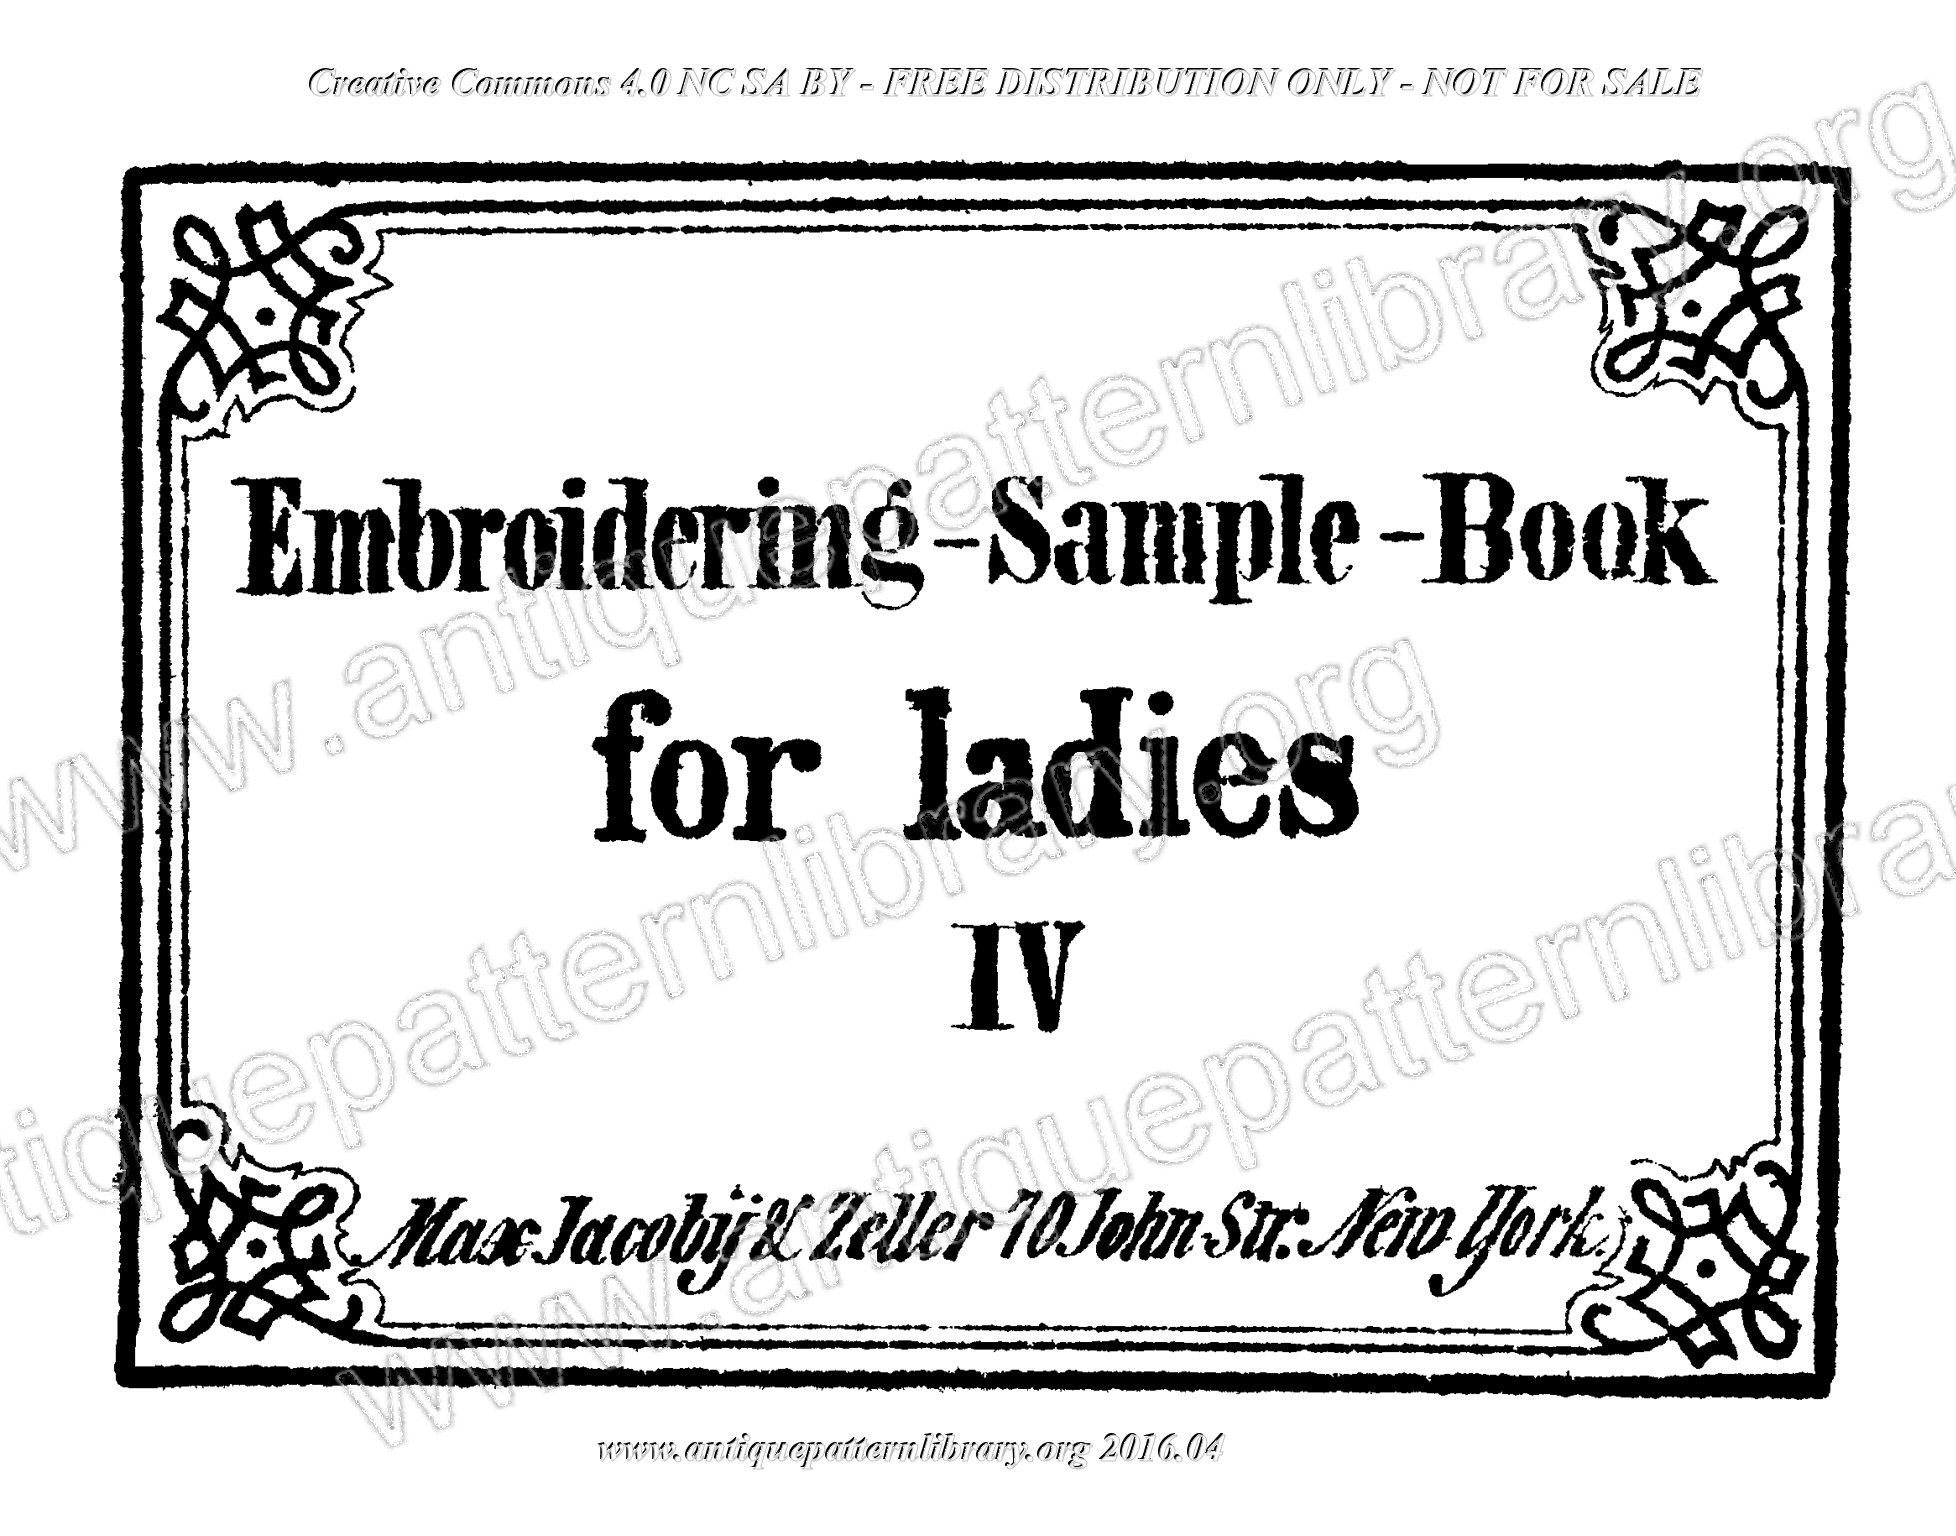 G-MR001  Embroidering-Sample-Book for ladies 